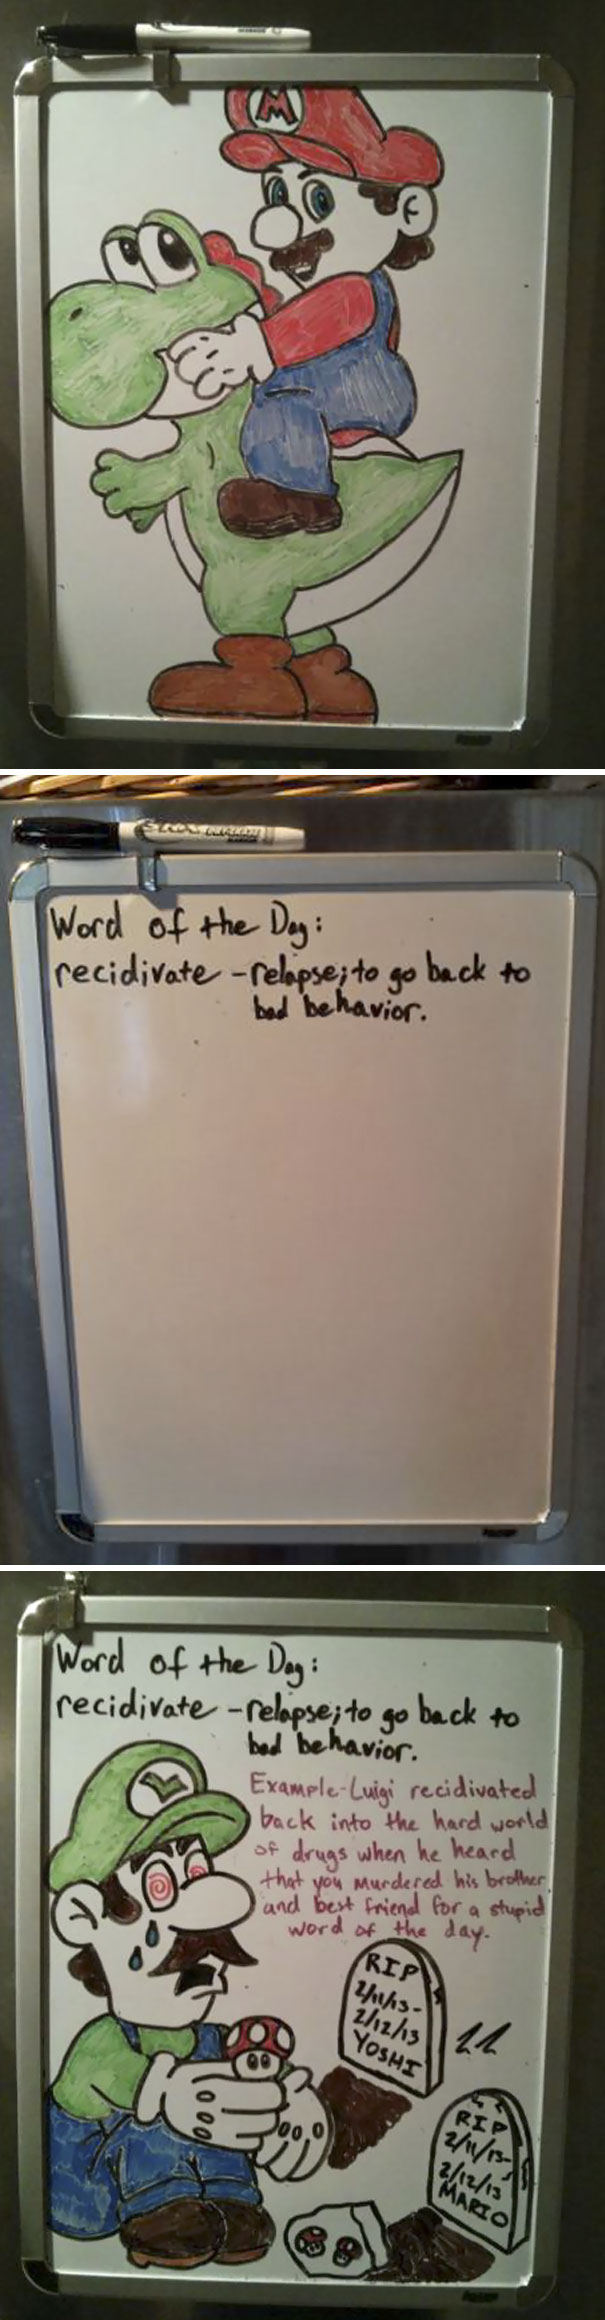 Roommate Replaced My Mario Doodle With A Word Of The Day On Our White Board